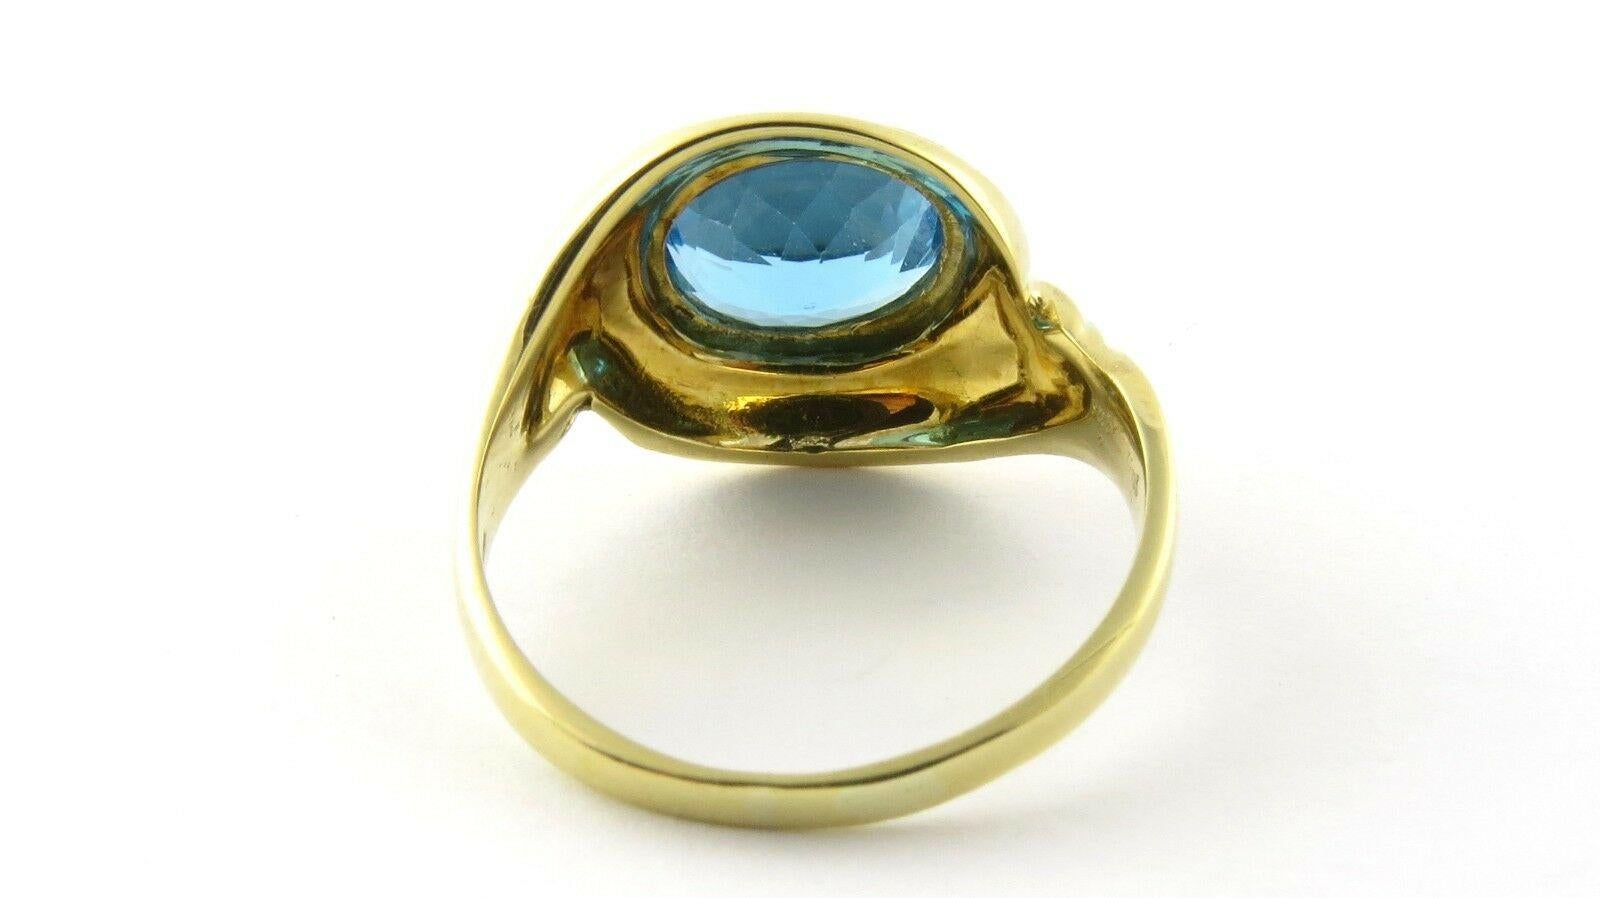 Sabbadini Gioielli 18K Yellow Gold Oval Blue Topaz Ring

This authentic Sabbadini ring is set with a stunning oval blue topaz stone.

Blue Topaz is approx. 9mm x 6.5 mm

Front of ring is approx. 18mm x 14mm

Shank of ring is 2mm wide

5.4 g / 3.4